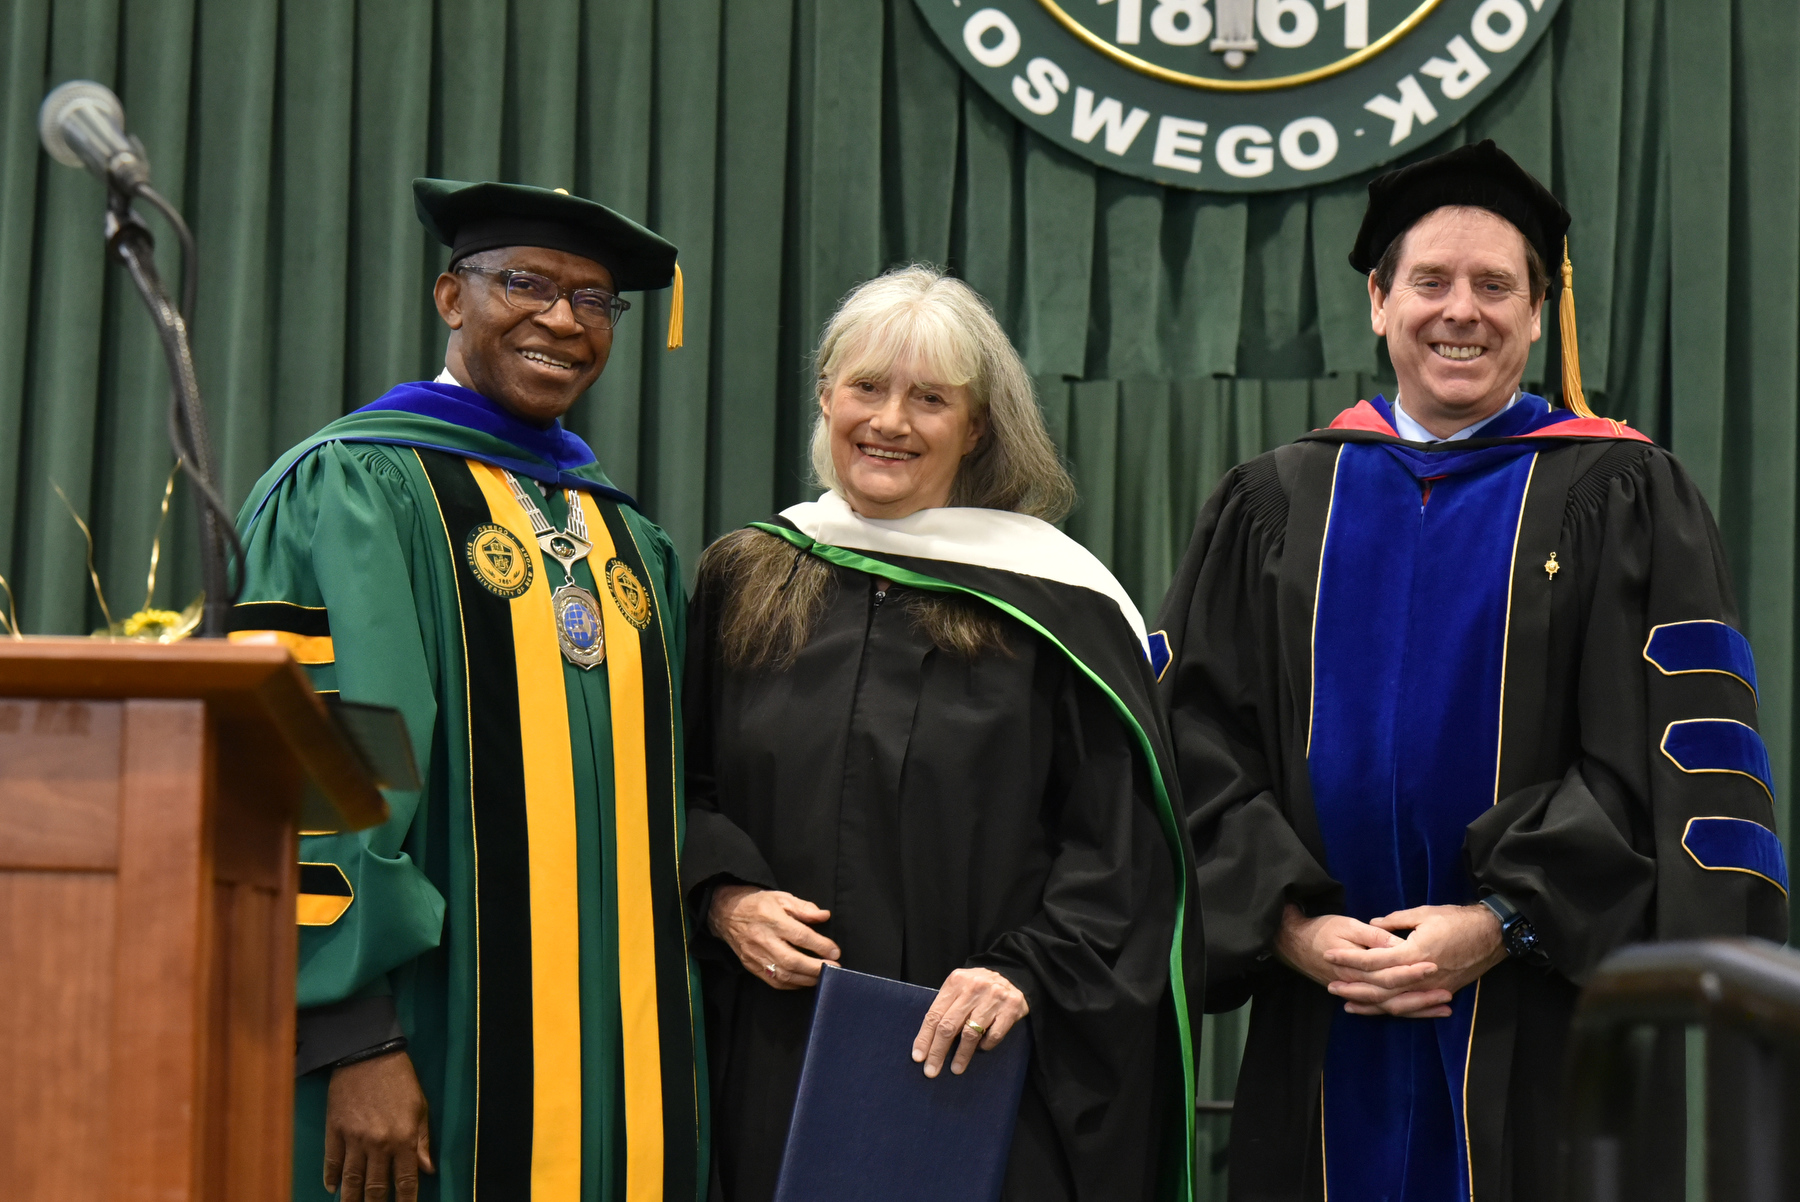 Virginia (Ginny) Donohue, a 1988 Oswego graduate and founder of On Point for College, received a State University of New York honorary doctorate degree at Commencement. Presenting at the commencement ceremony platform is College President Peter Nwosu (left) and Provost and Vice President for Academic Affairs Scott Furlong.